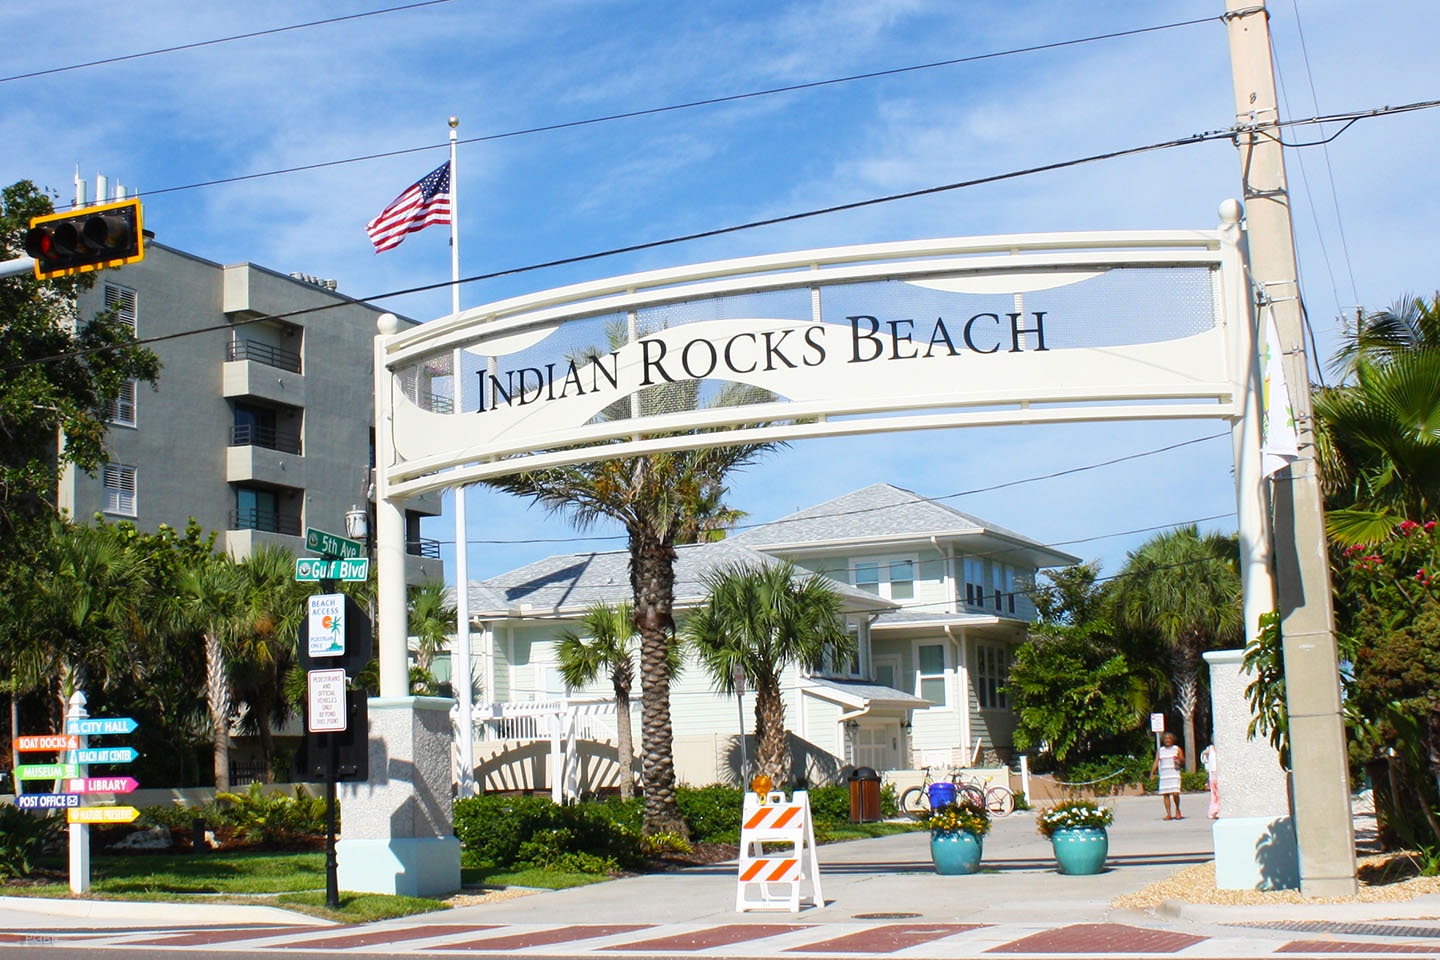 The gate to Indian Rocks Beach greets you on arrival.